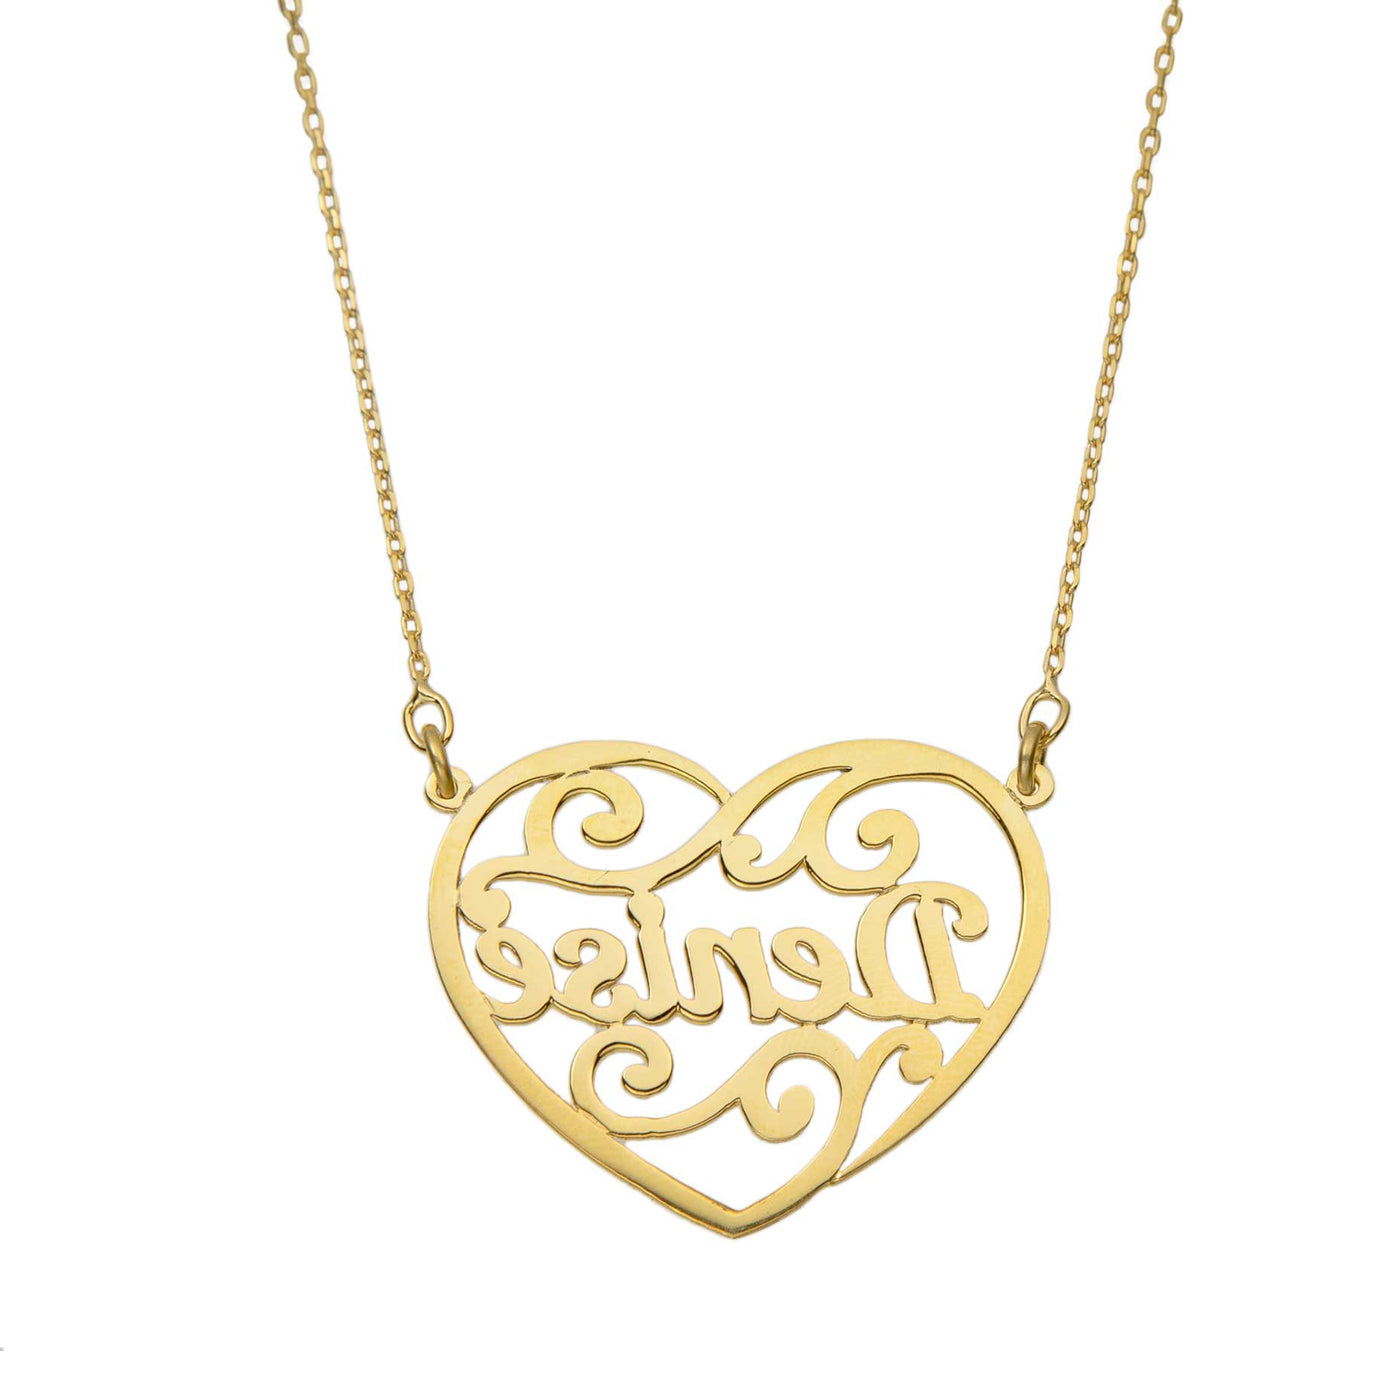 Ladies Heart Name Plate Necklace 14K Gold - Style 169